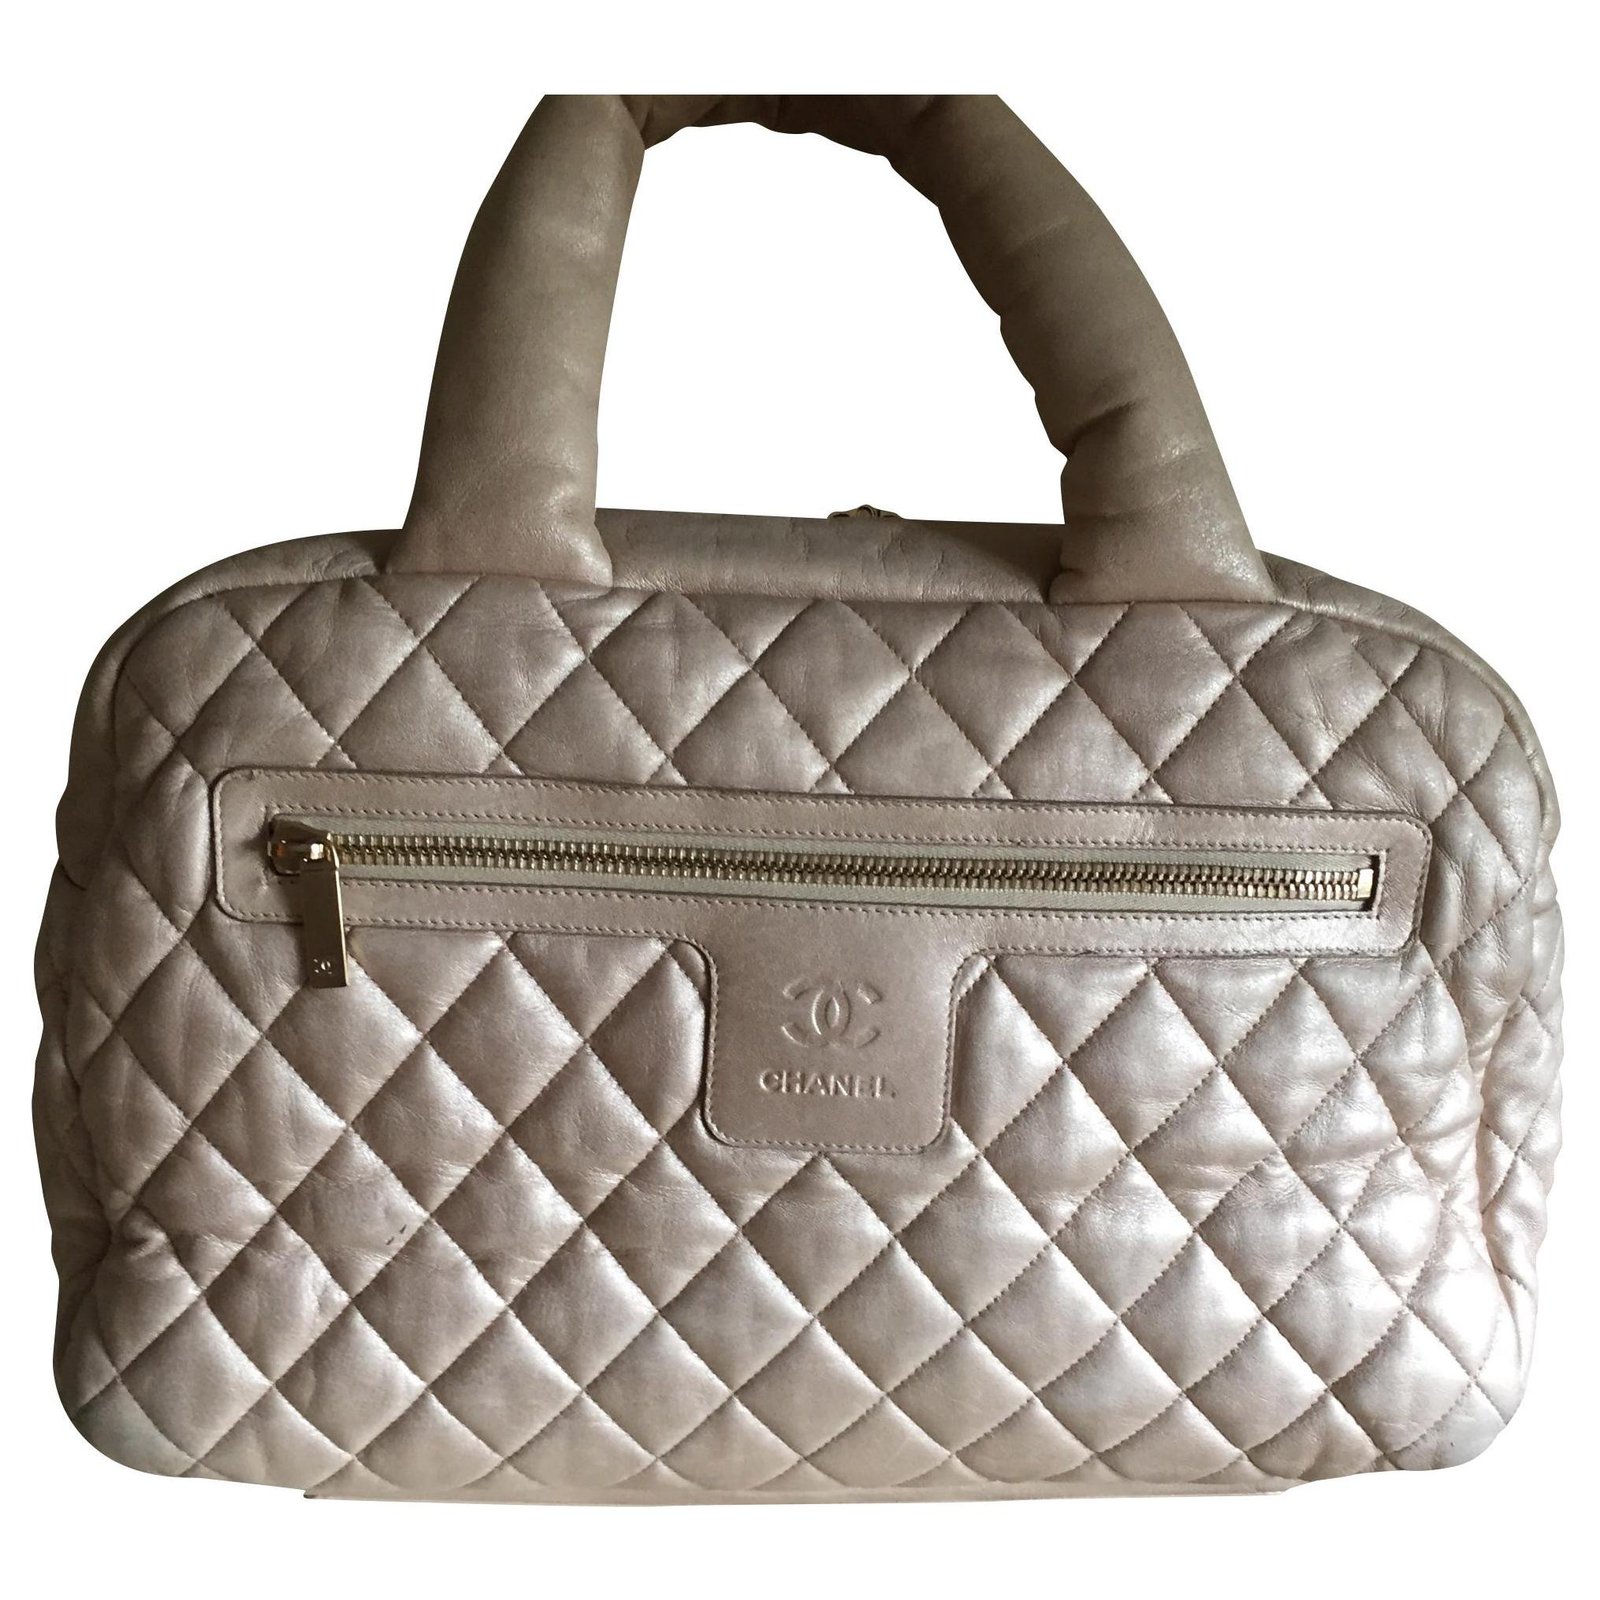 CHANEL COCOON BAG IN LEATHER LIGHT GOLDEN LEATHER